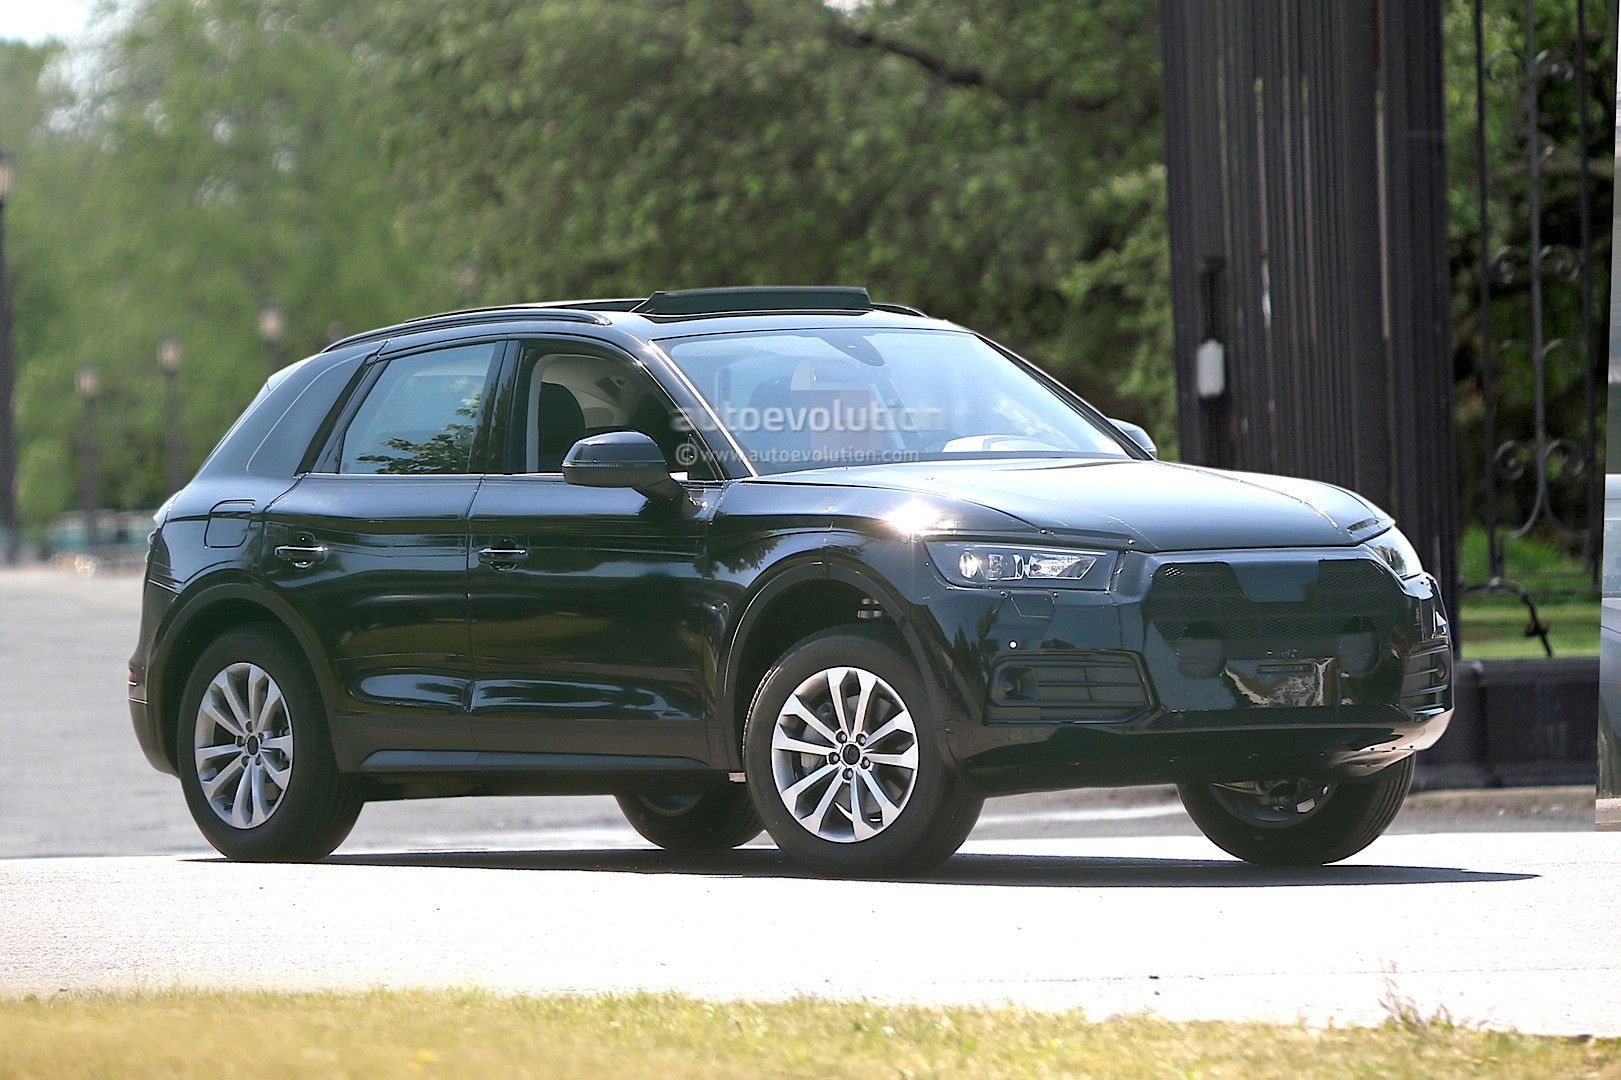 Spyshots: 2017 Audi Q5 Spied Almost Completely Undisguised ...